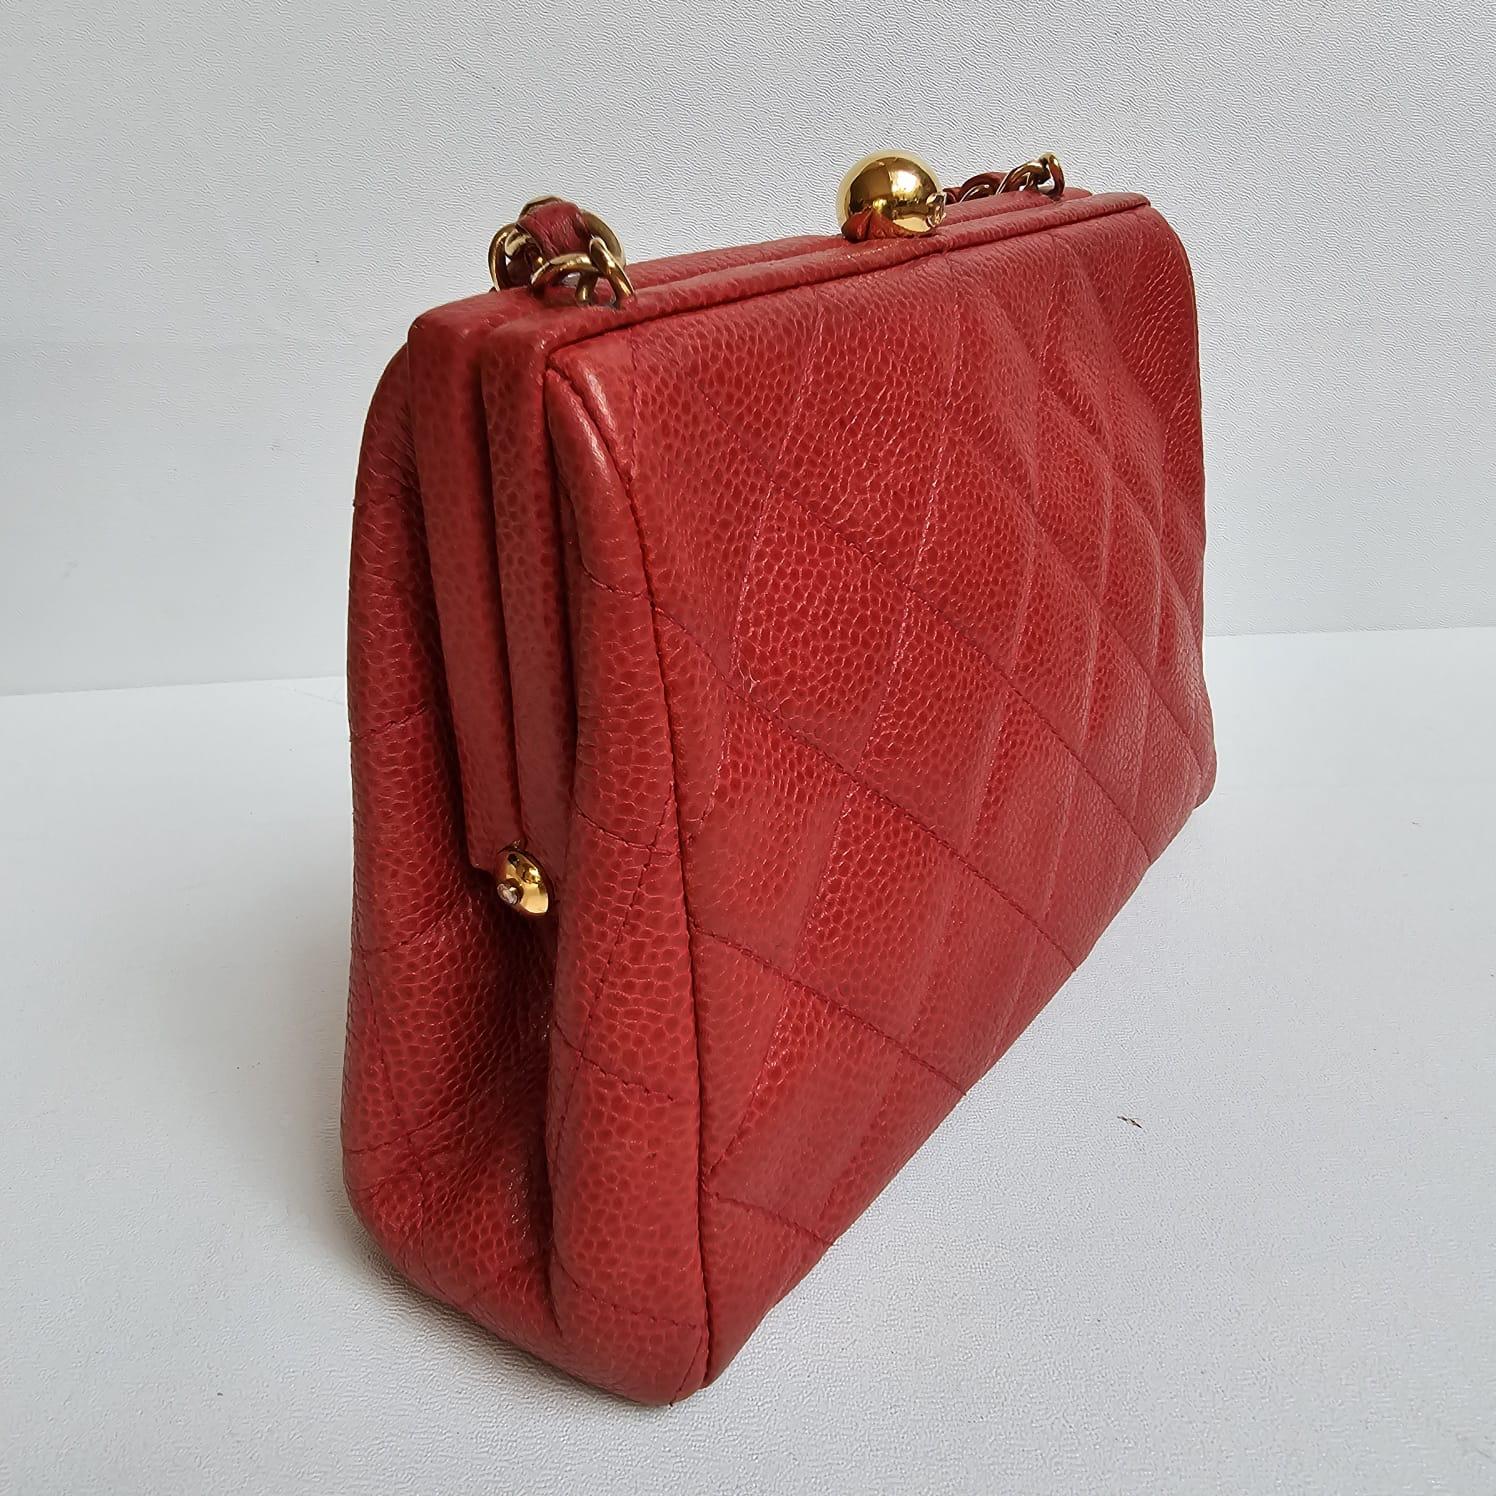 Vintage 1990s Chanel Red Caviar Quilted Mini Purse Sling Bag For Sale 7